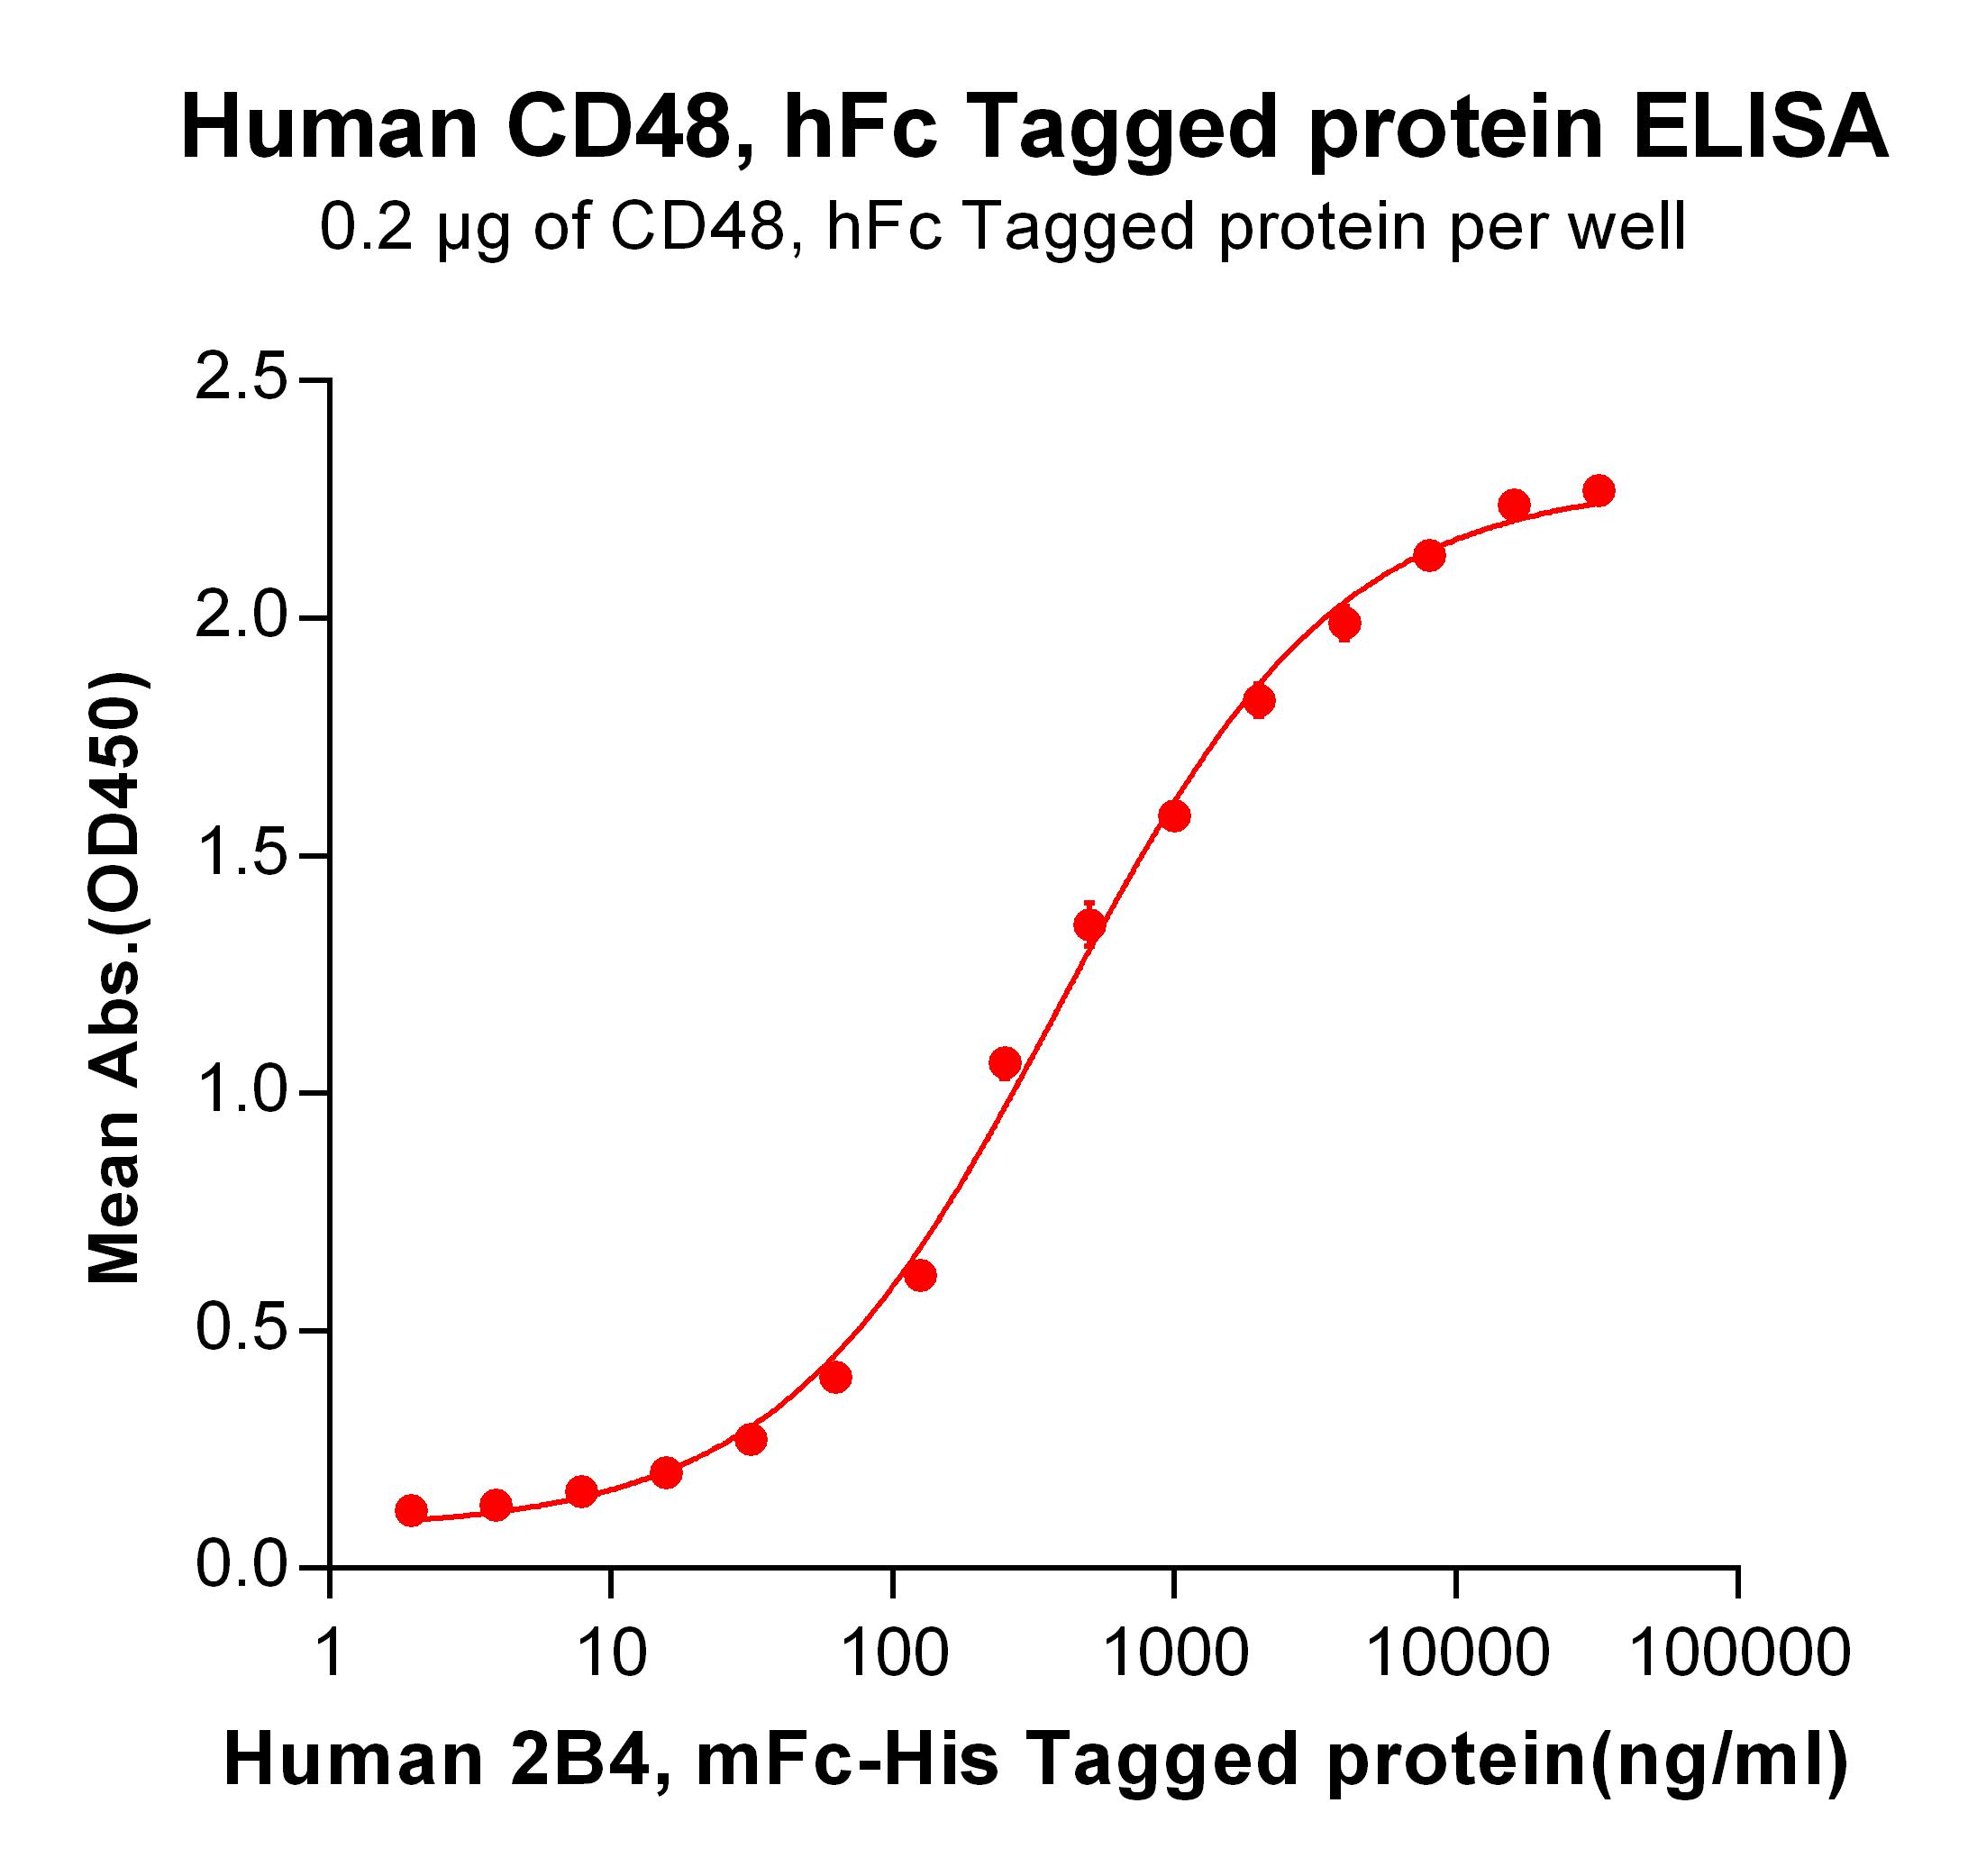 Figure 2. ELISA plate pre-coated by 2 µg/ml (100 µl/well) Human 2B4, mFc-His tagged protein  can bind Human CD48, hFc tagged protein  in a linear range of 31.25-4000 ng/ml.